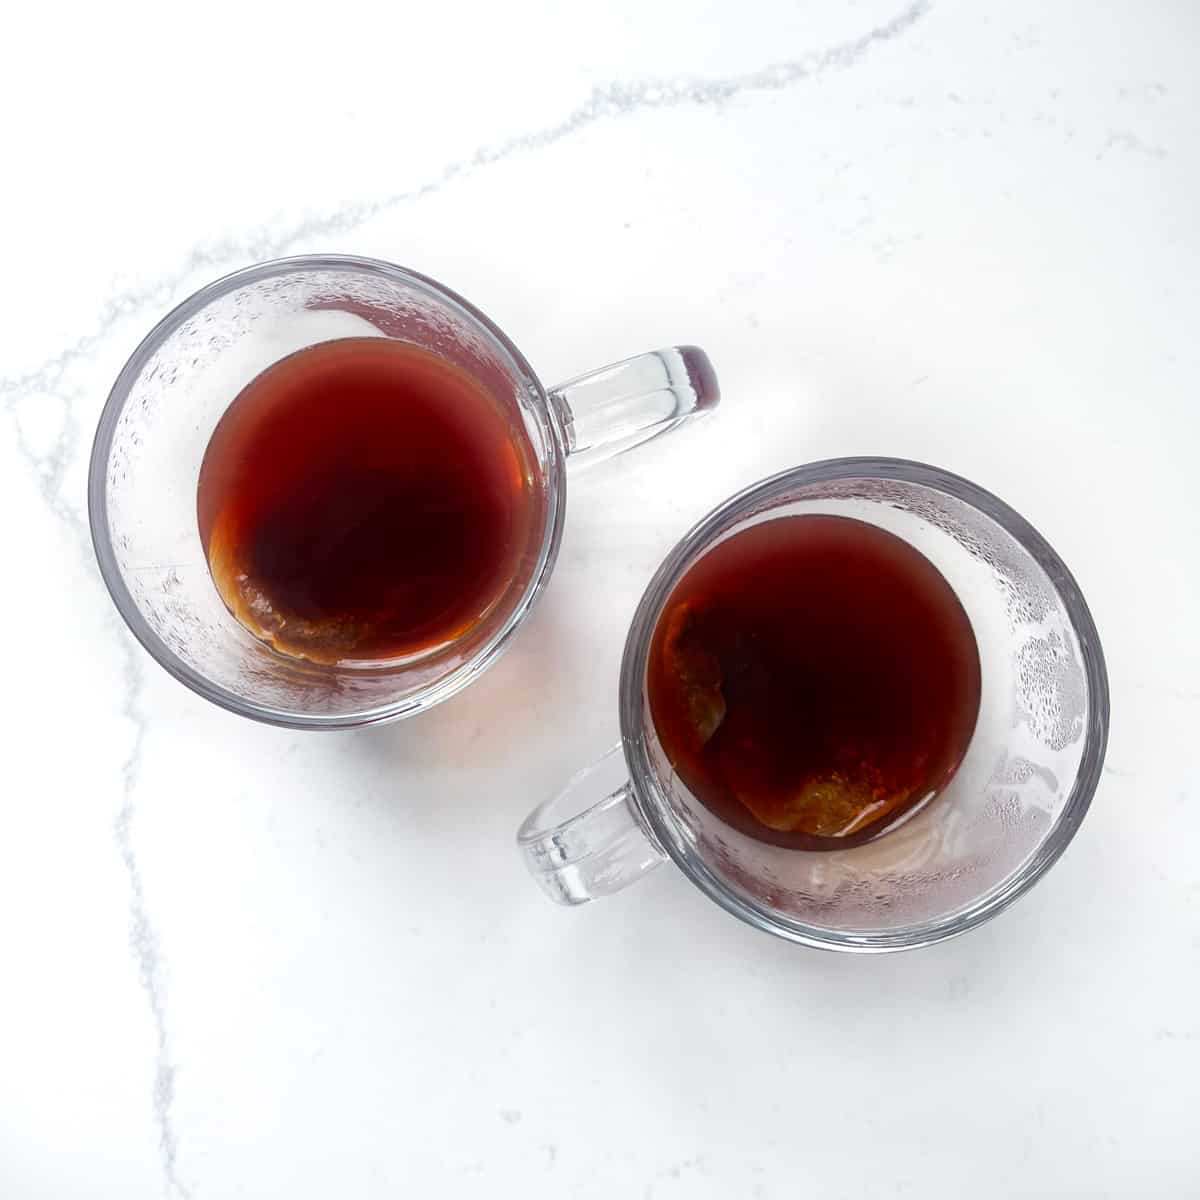 Strong Rooibos tea in two glass mugs.